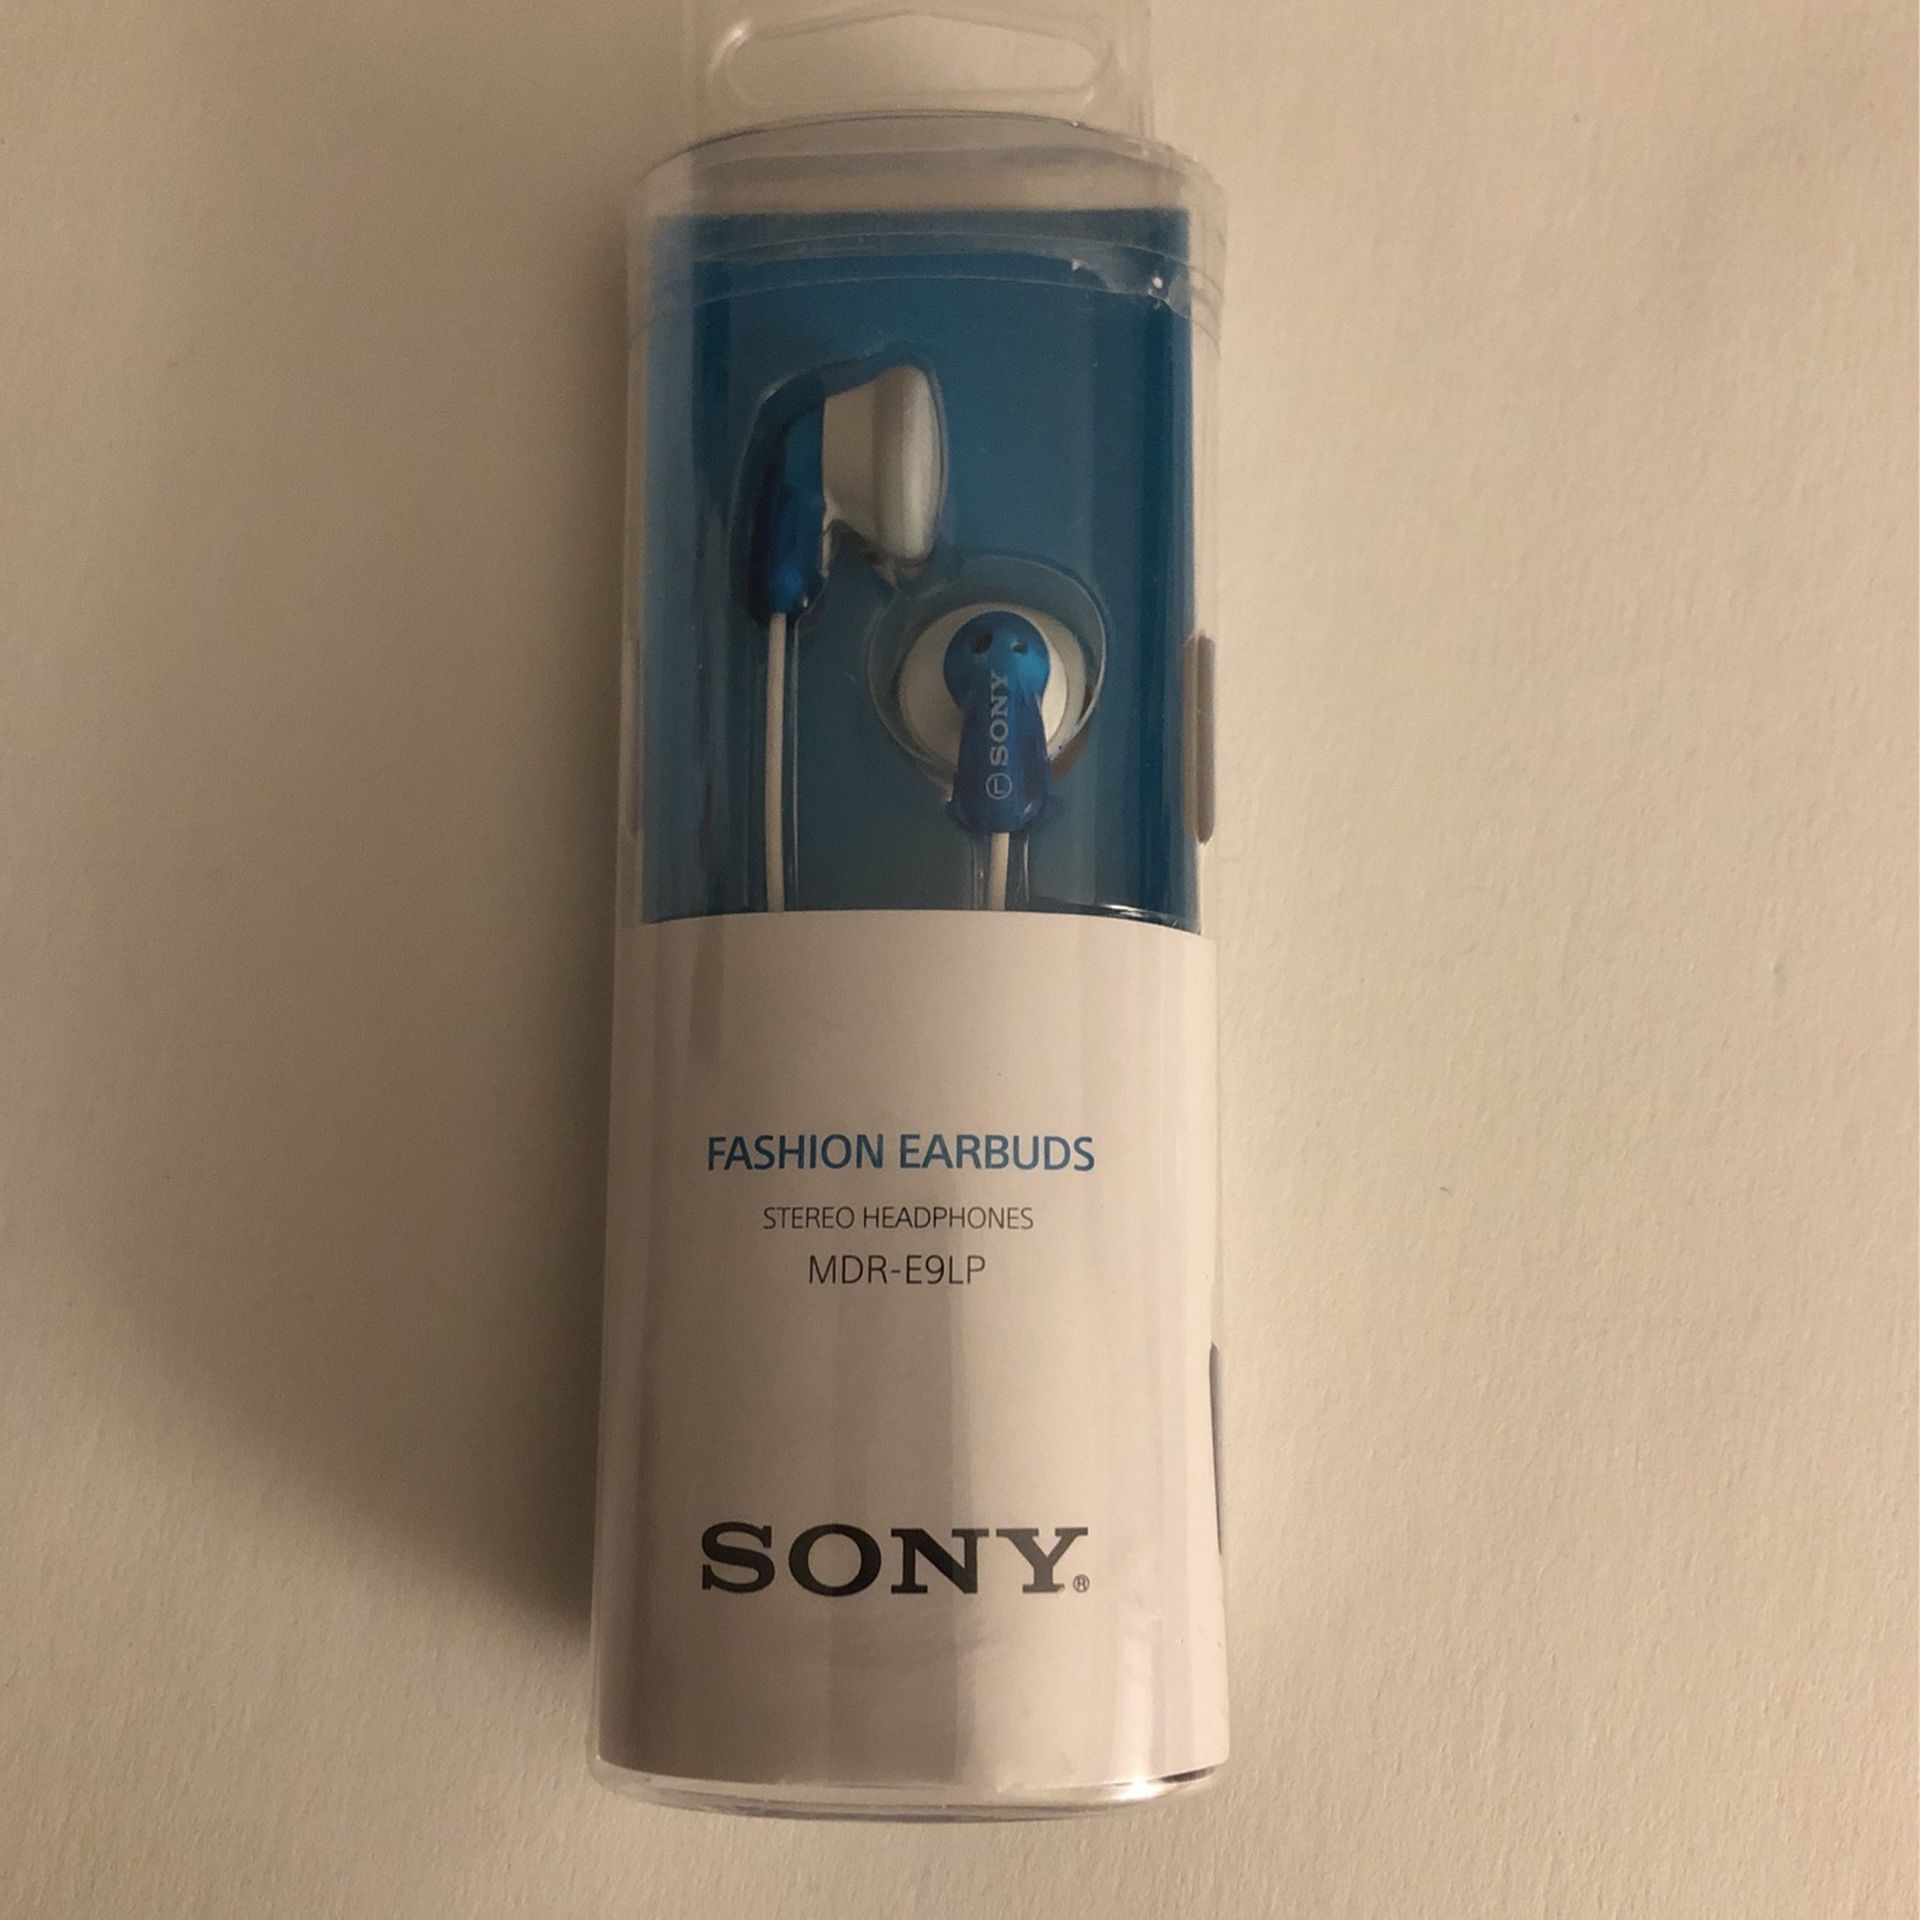 Sony Earbuds In Color Blue And White